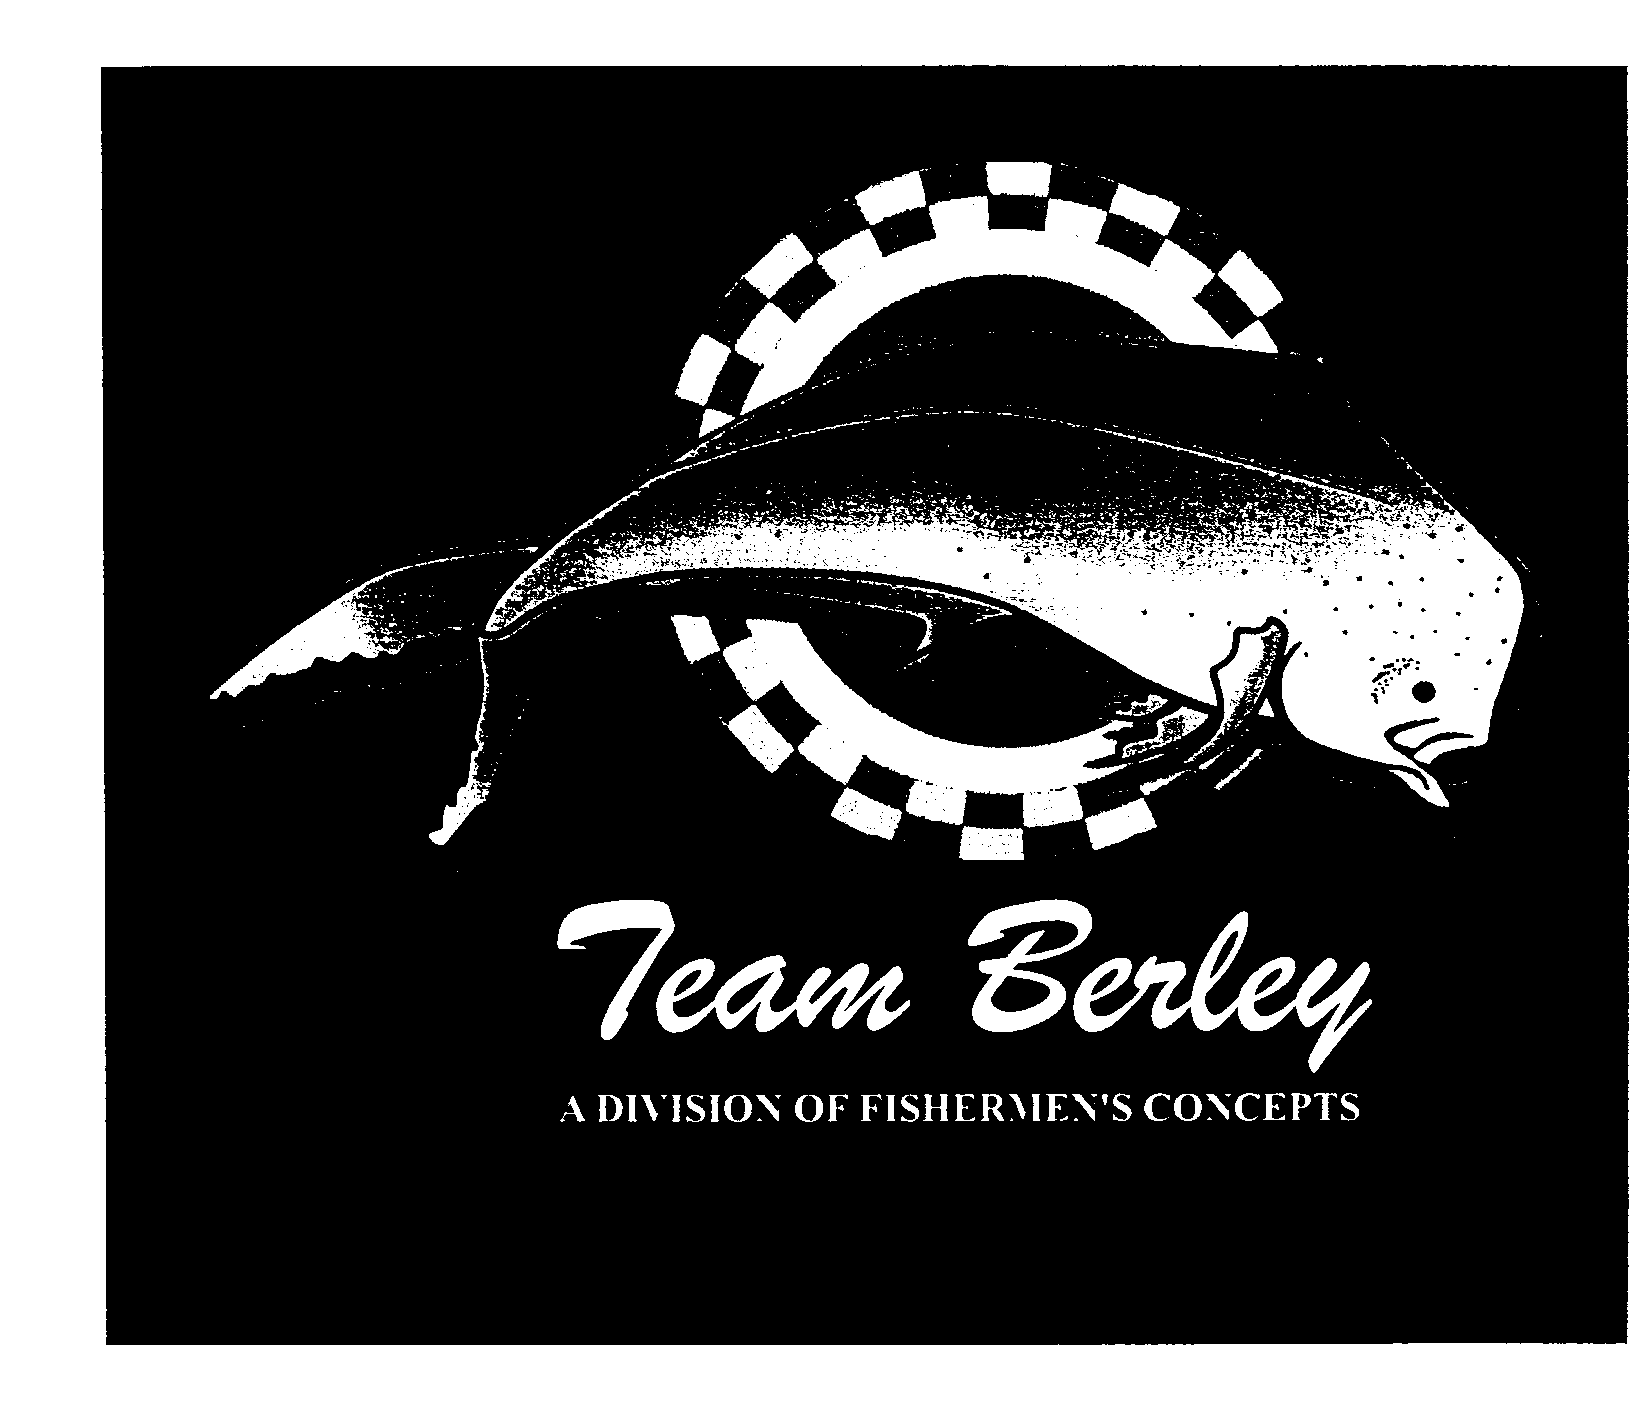 Trademark Logo TEAM BERLEY A DIVISION OF FISHERMEN'S CONCEPTS